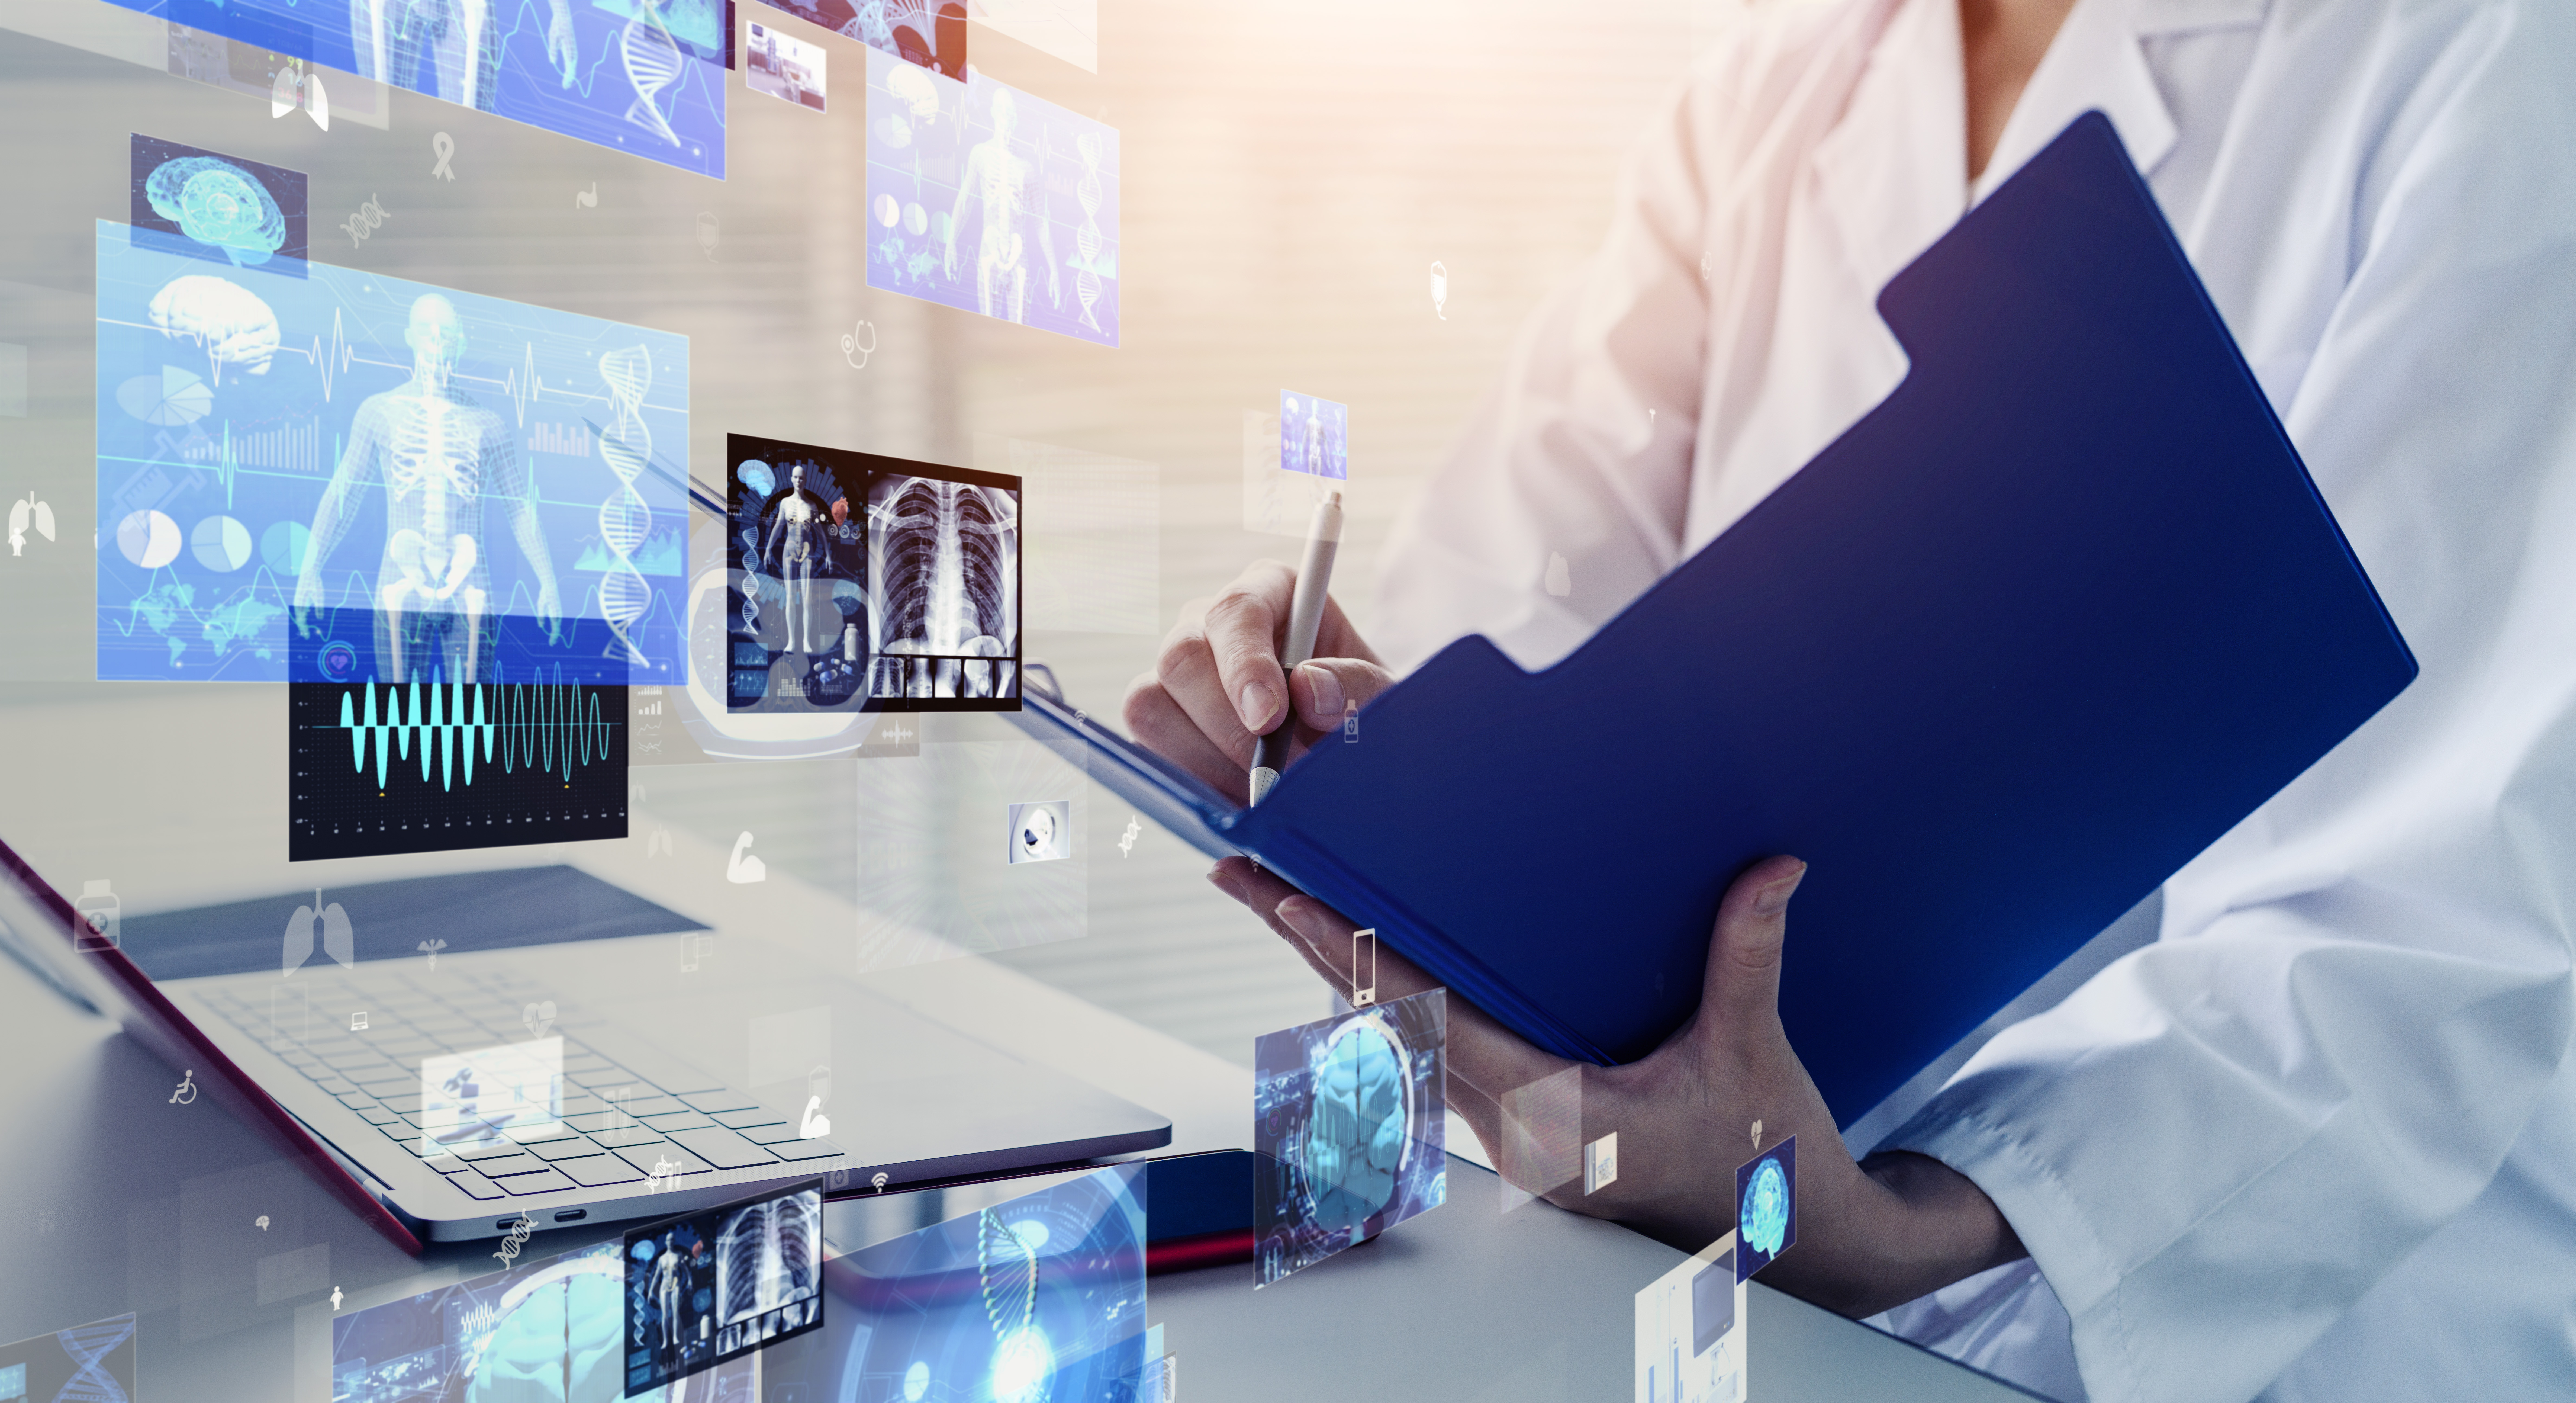 Interconnected EHRs, imaging devices, and other systems make a patient's journey in a clinical setting more straightforward.